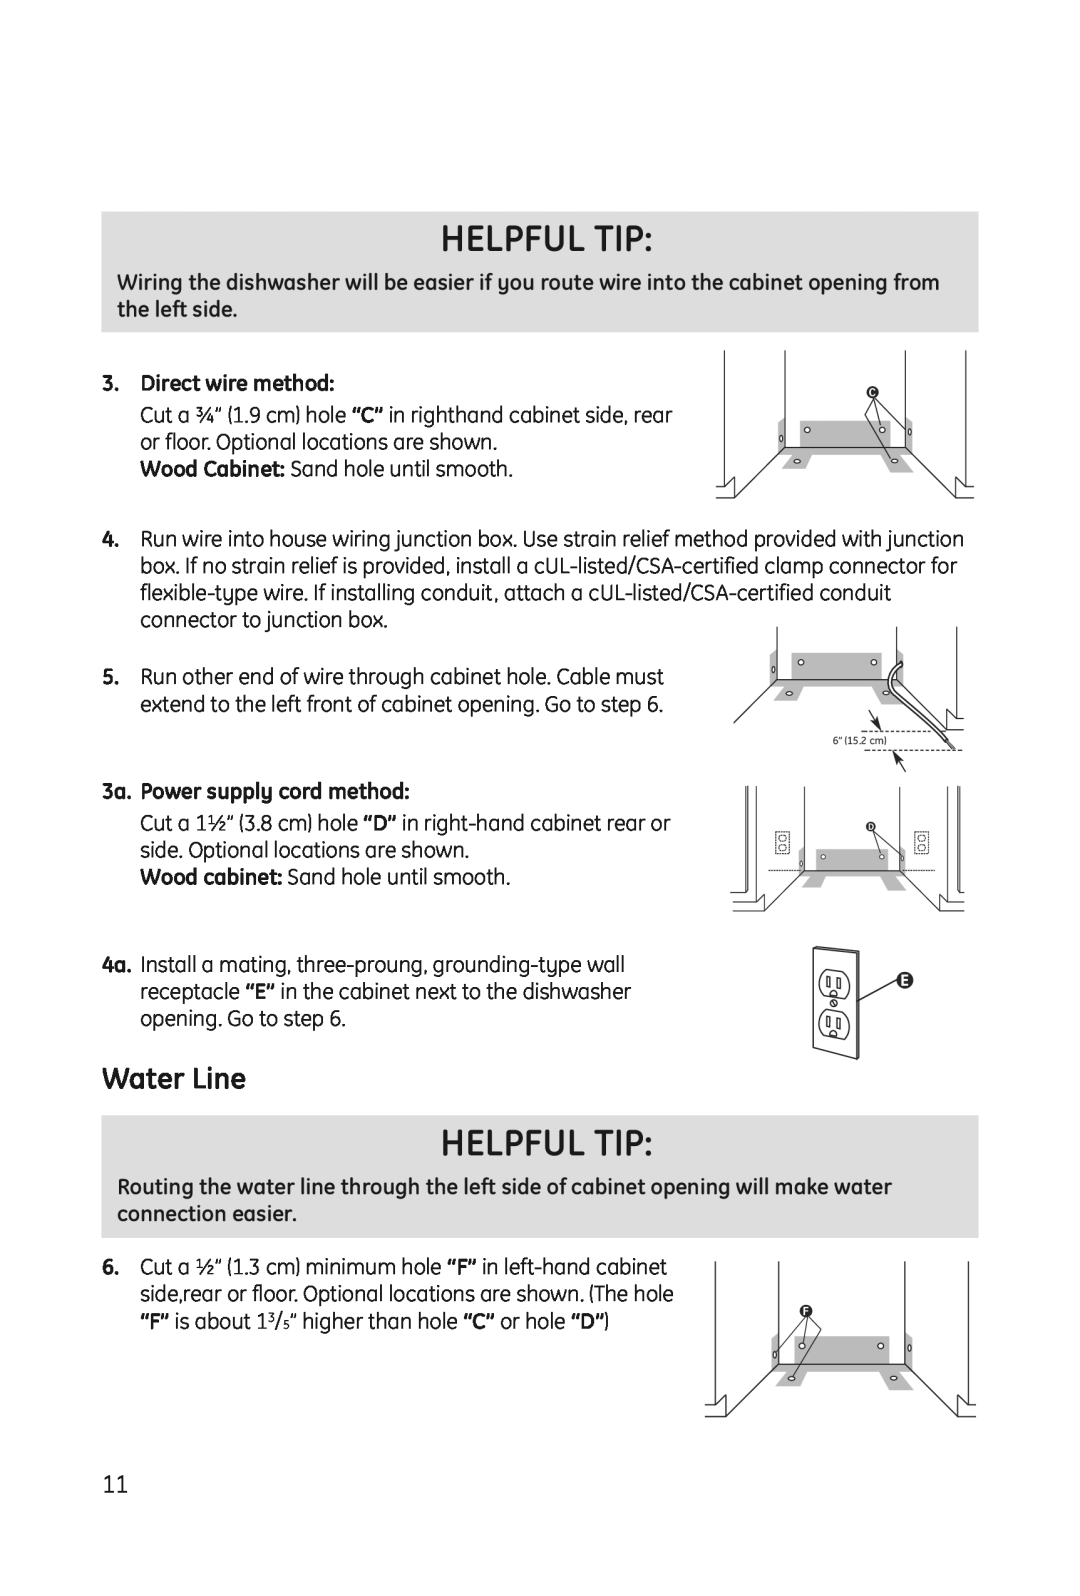 Haier DWL3025 installation manual Water Line, Direct wire method, 3a. Power supply cord method, Helpful Tip 